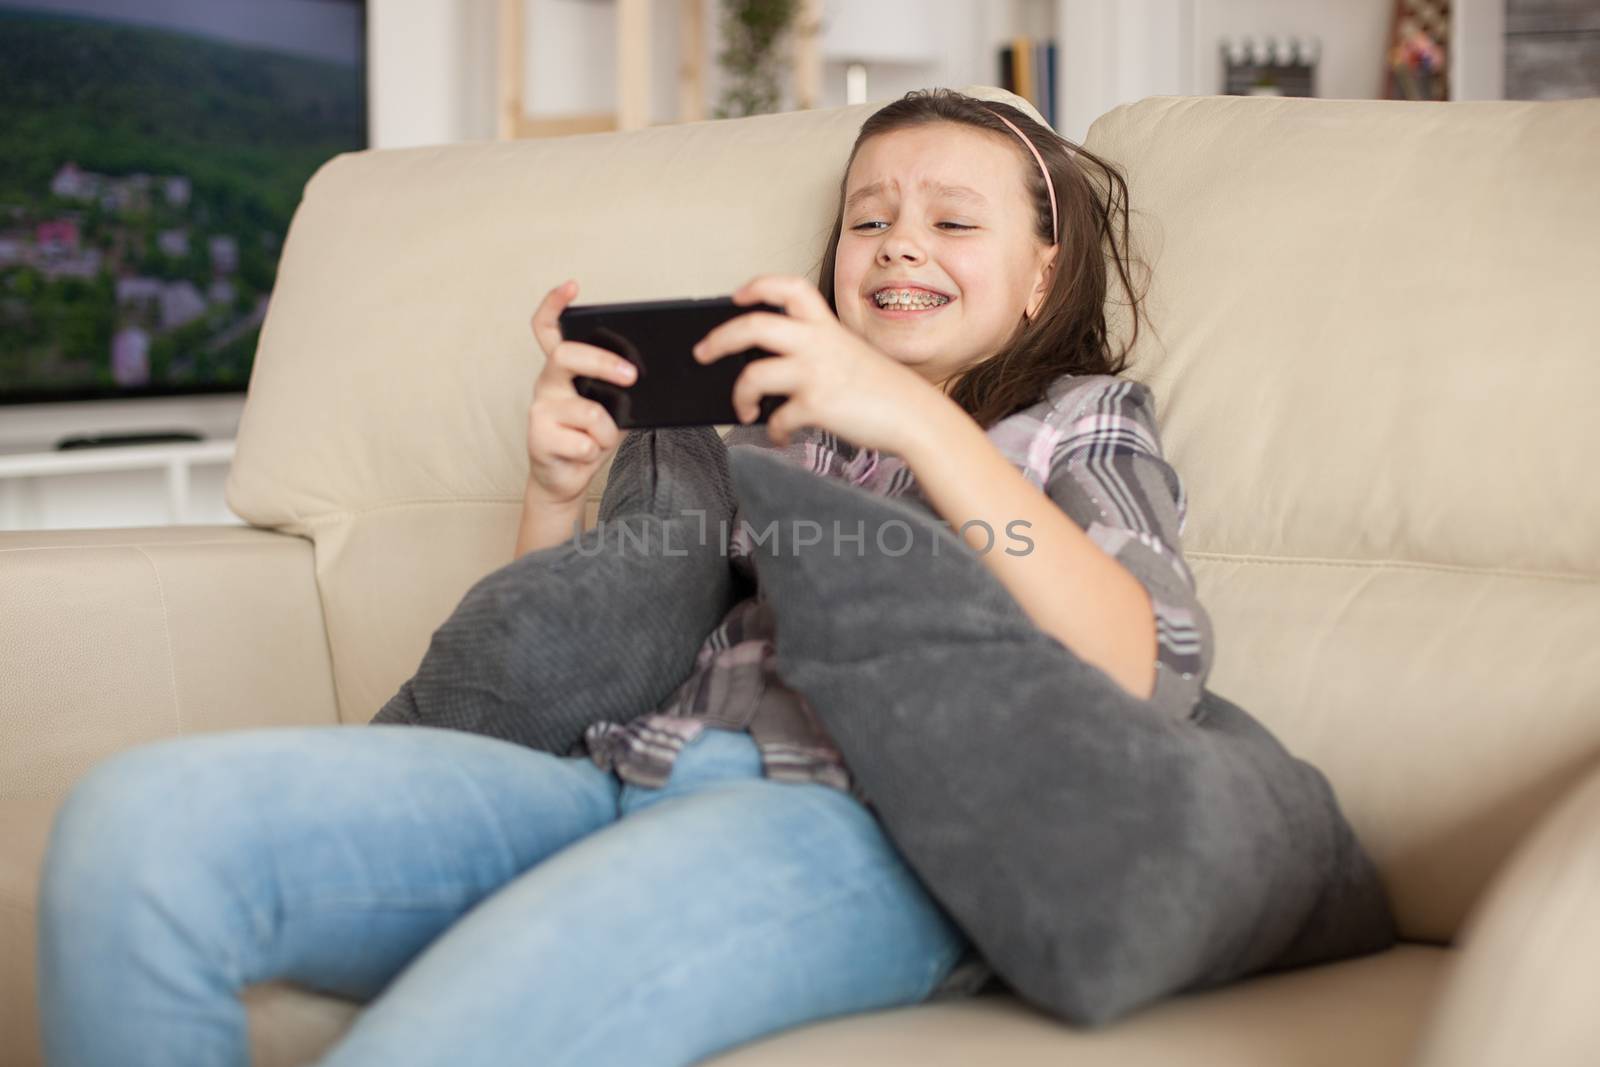 Cheerful little girl playing video games on smartphone lying on the couch.